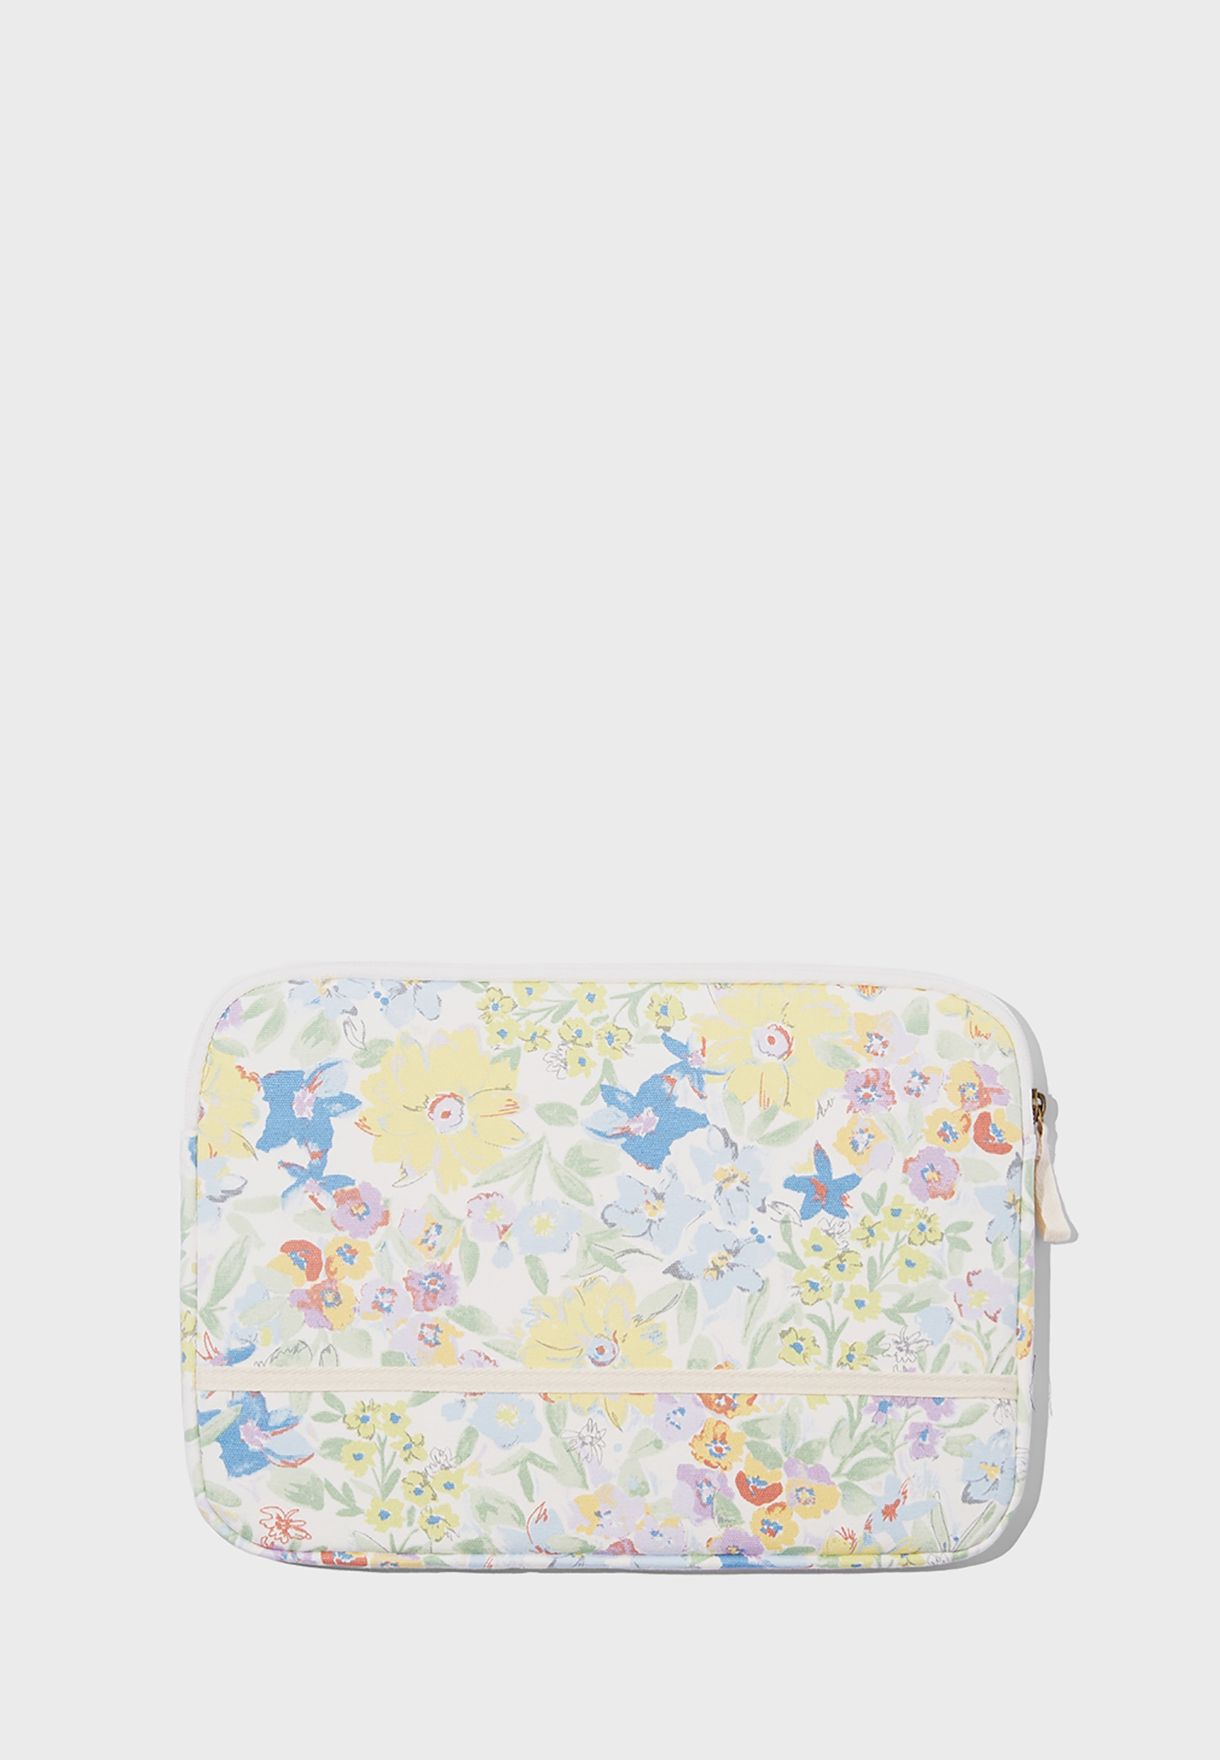 Handcrafted Floral 13' Floral Take Me Away Laptop Case